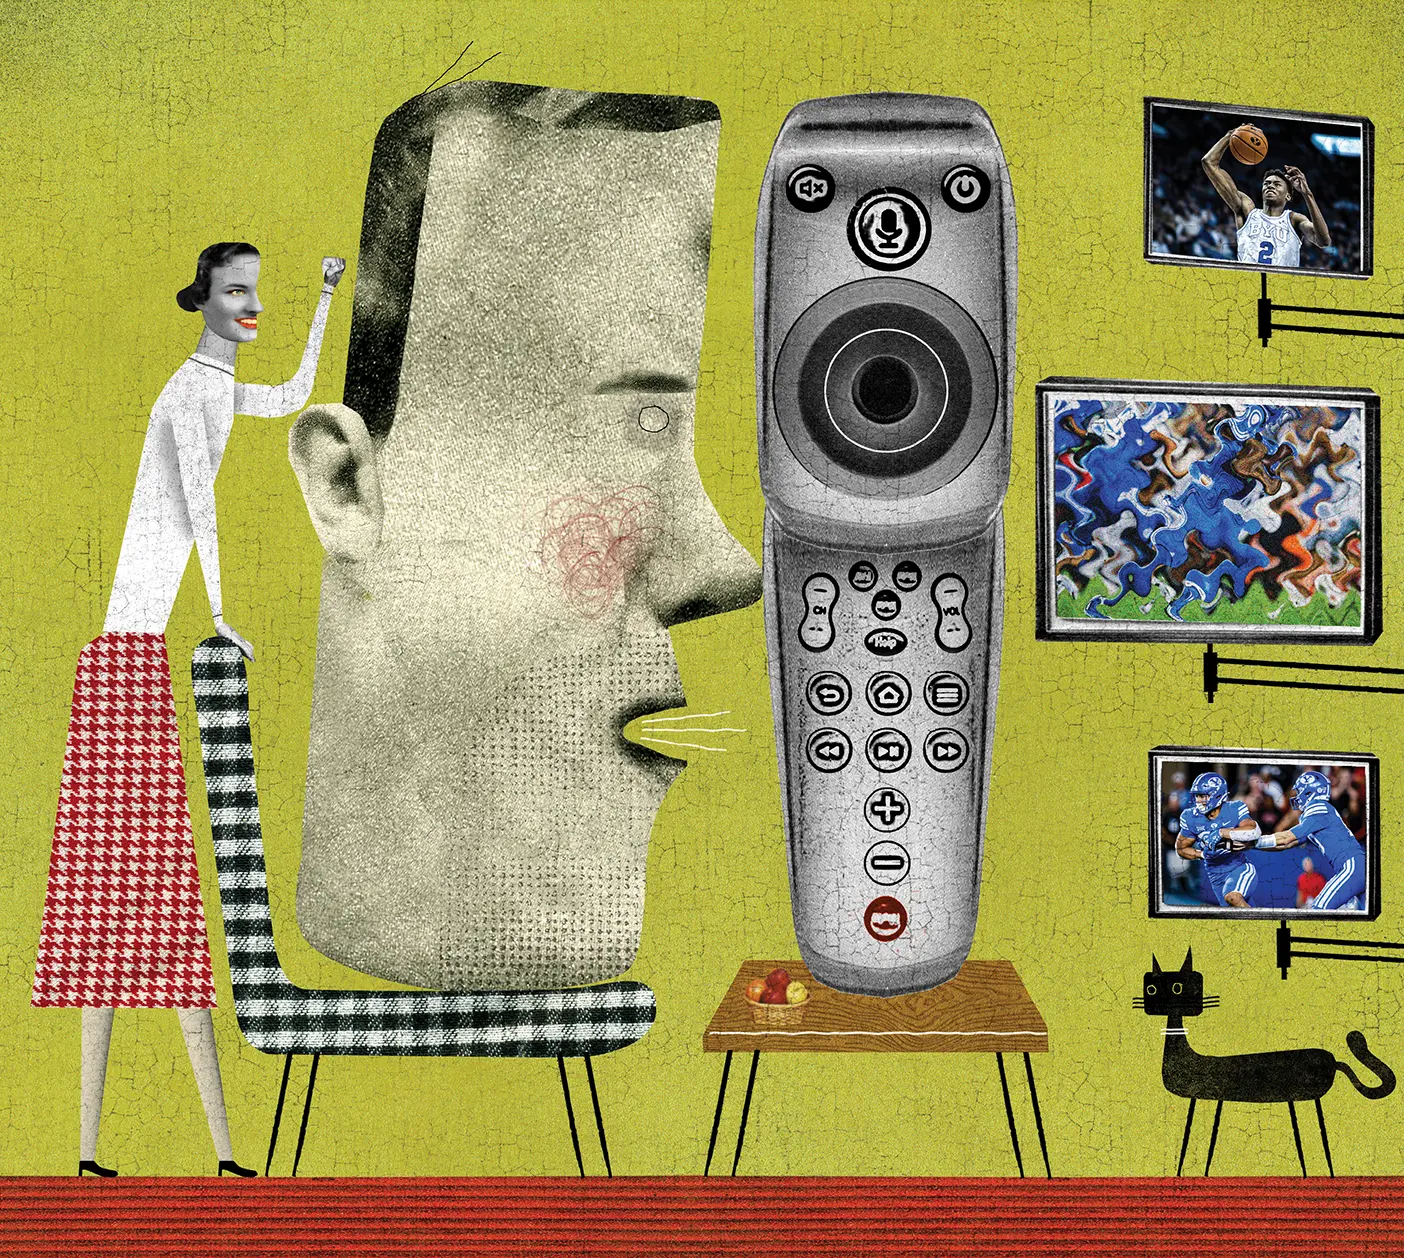 Mixed media design of a man's head speaking into a remote. Woman stands behind.